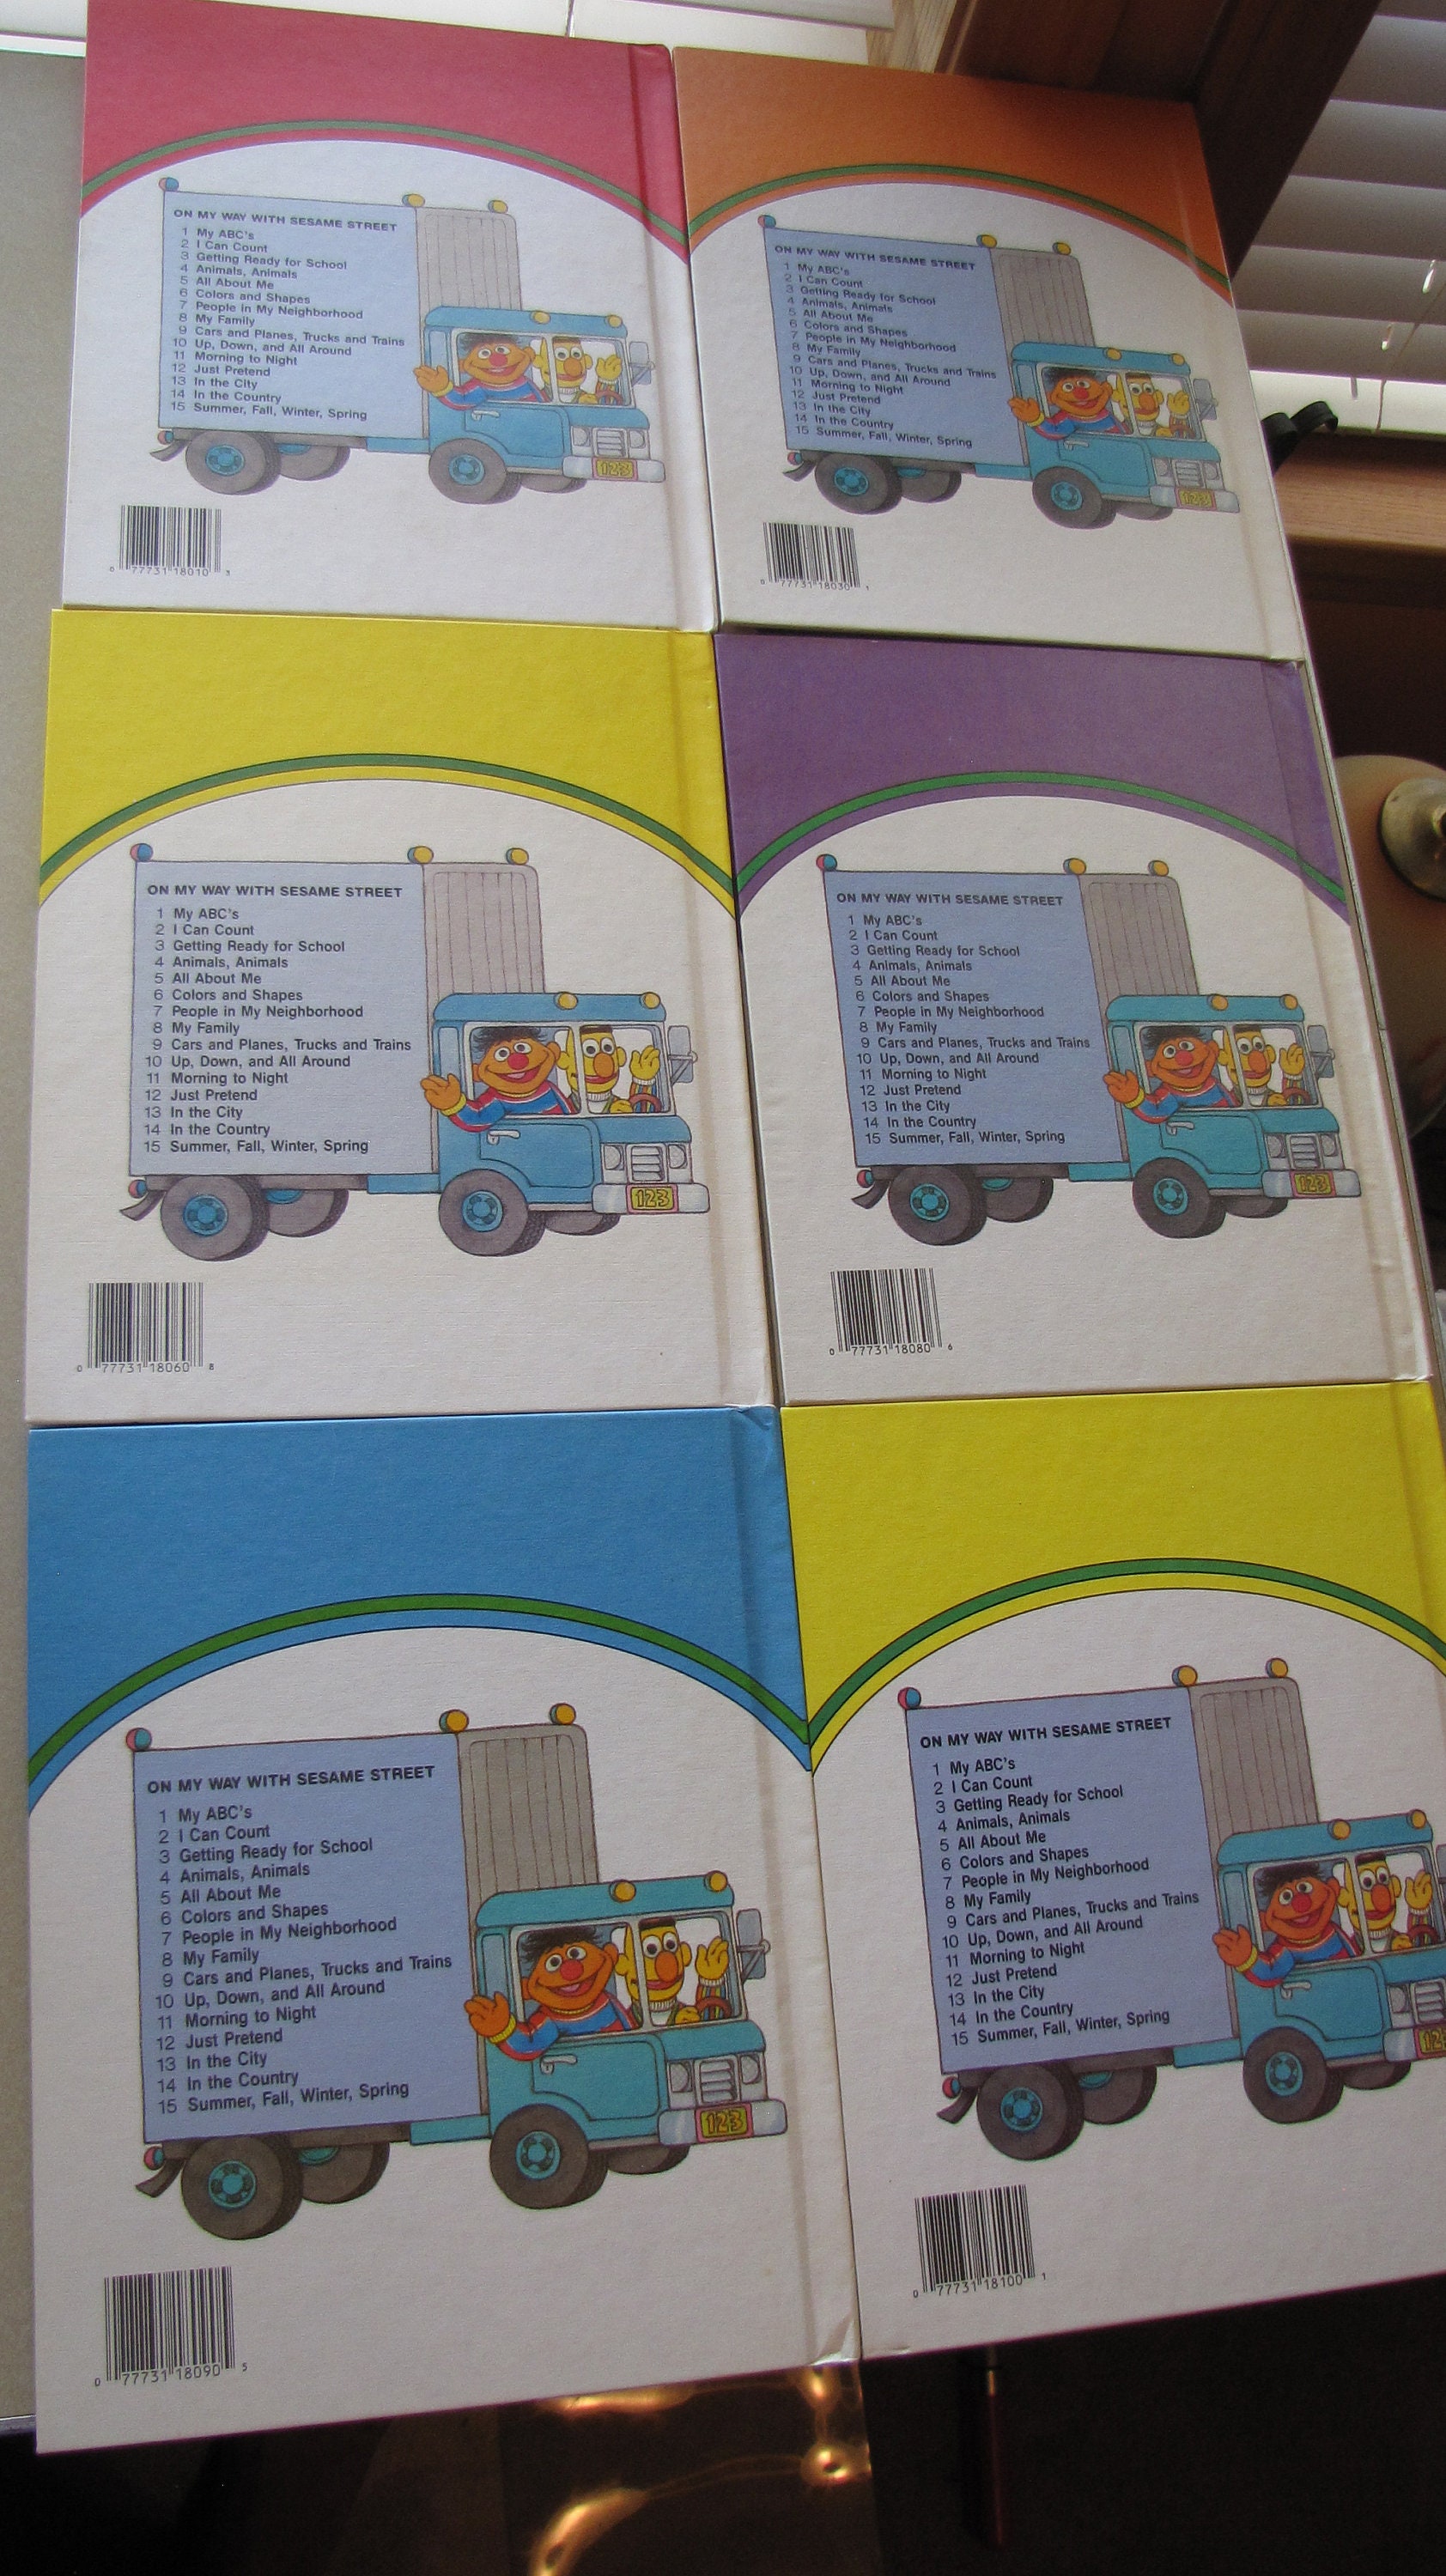 Set of 6 on My Way With Sesame Street, Vol. 1, 2, 3, 7, 9, 12 